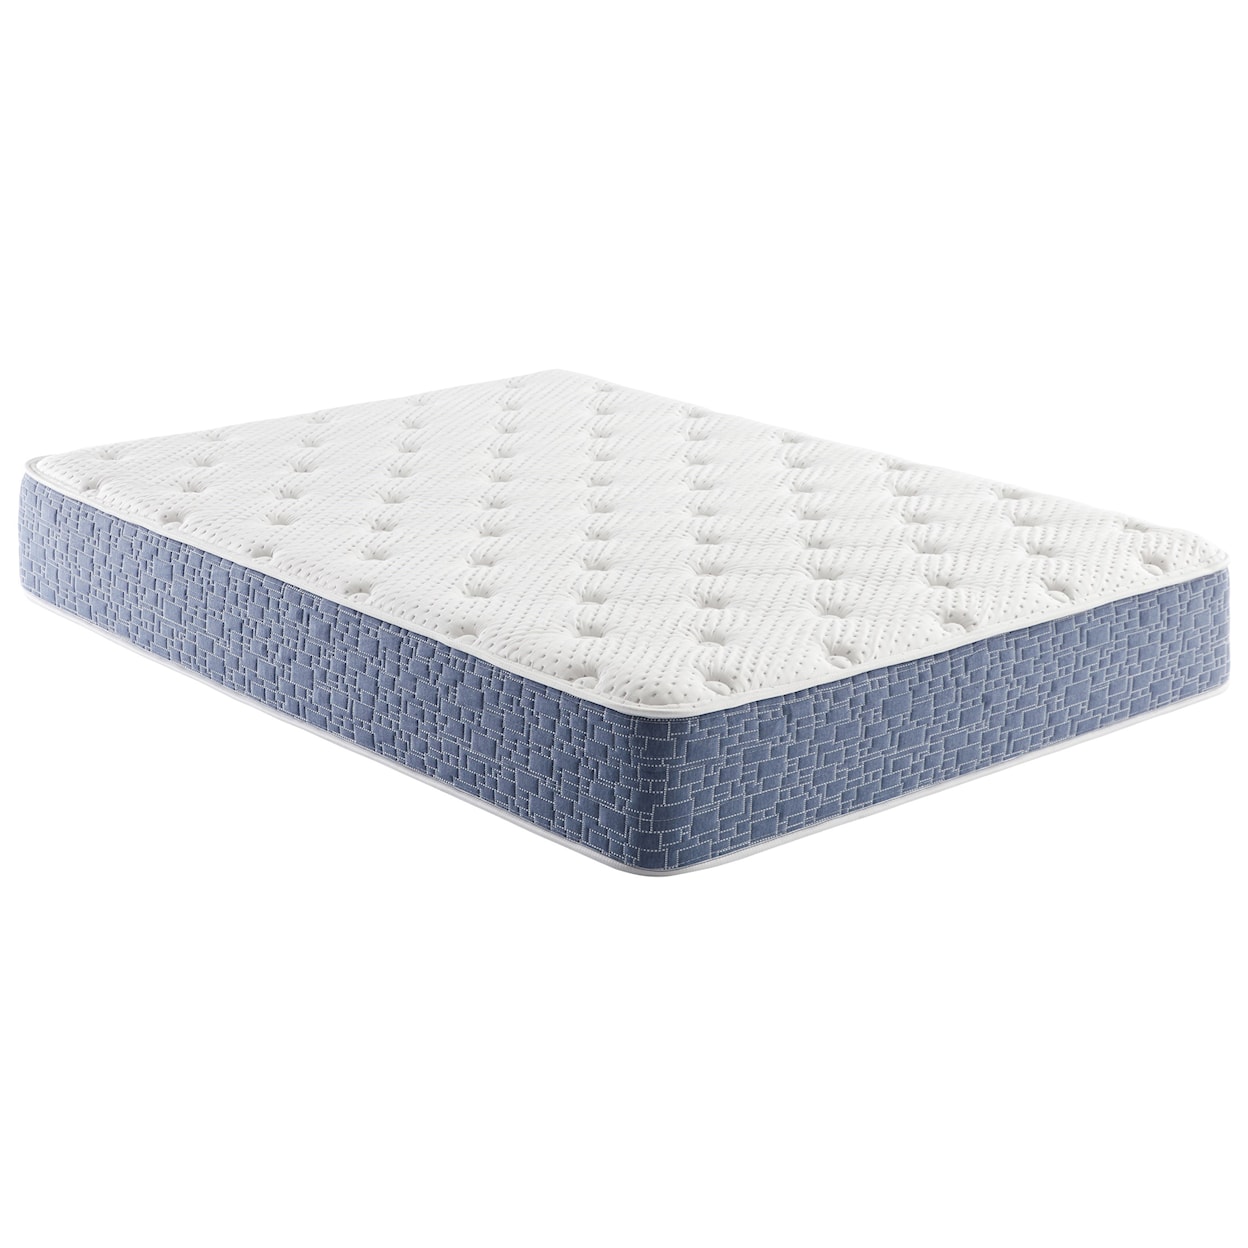 Corsicana ABR20511 King 11" Firm Hybrid Bed-In-A-Box Mattress